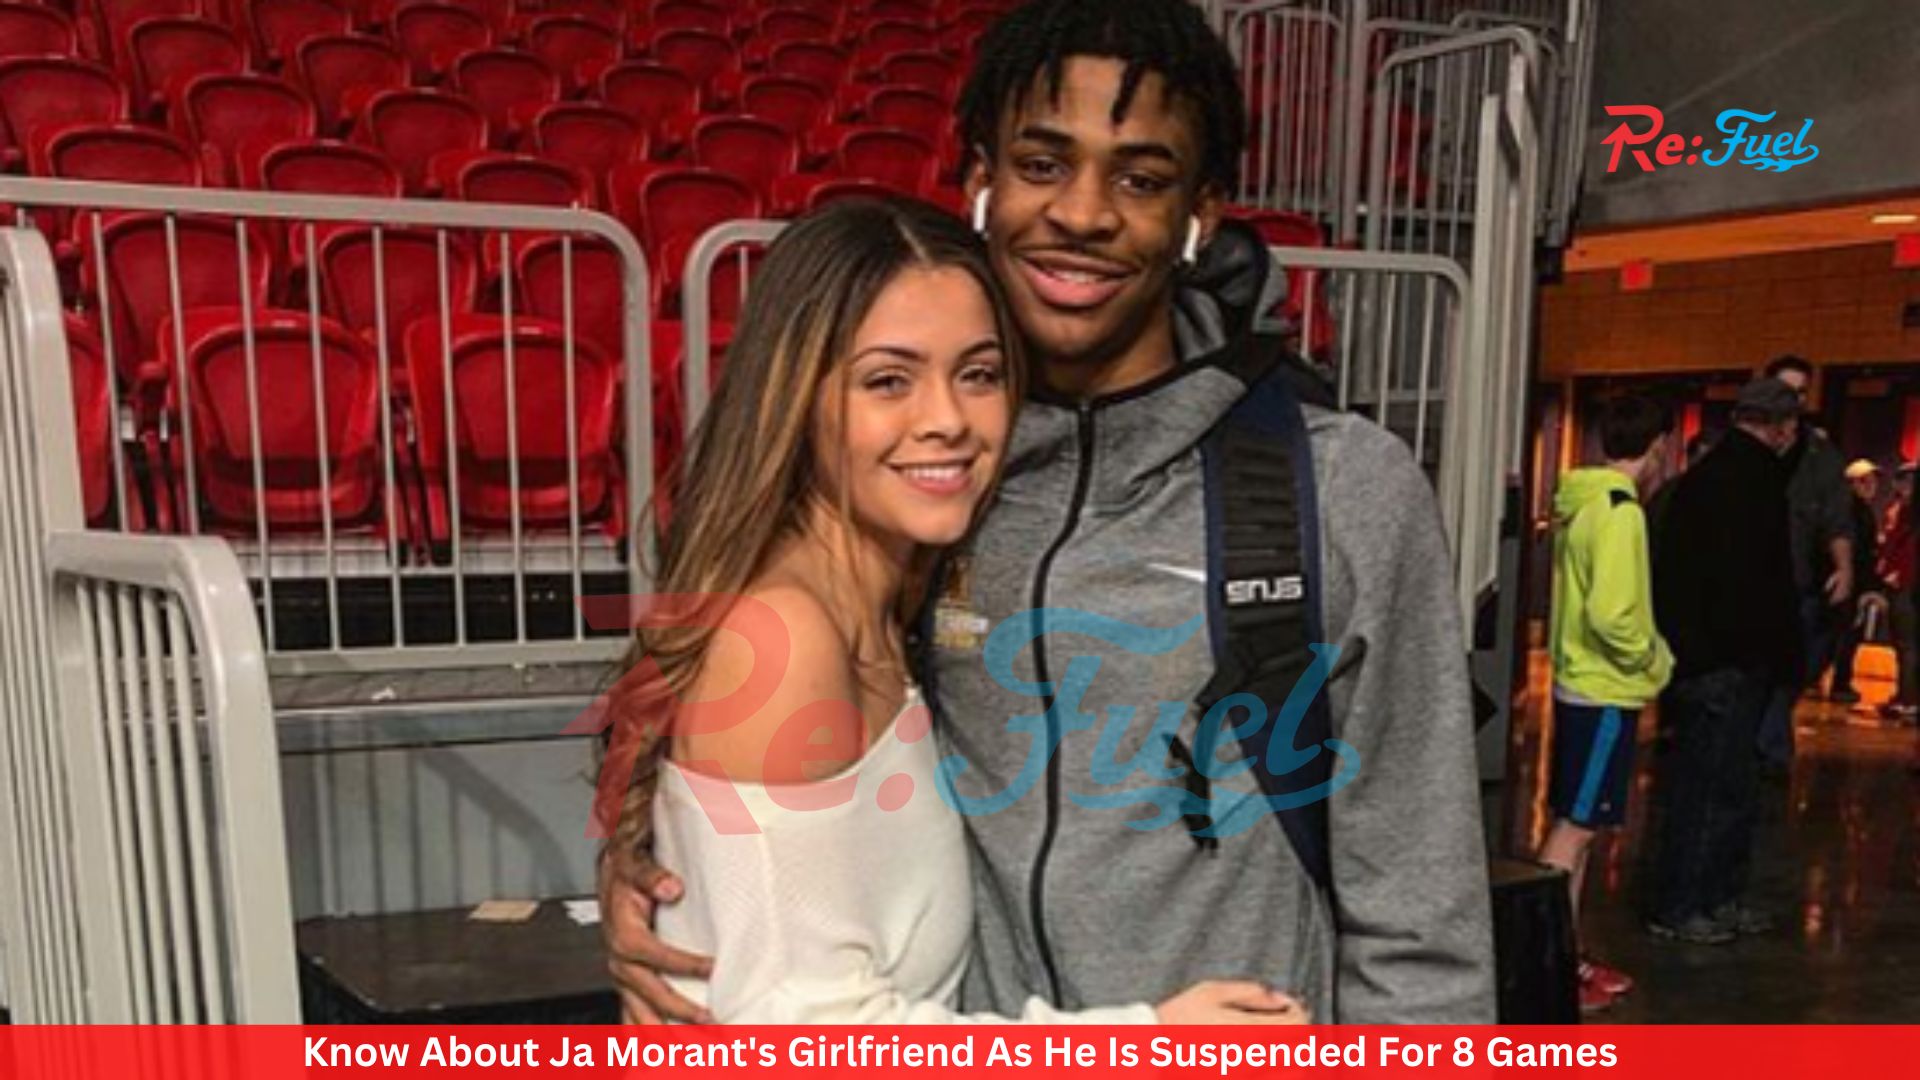 Know About Ja Morant's Girlfriend As He Is Suspended For 8 Games